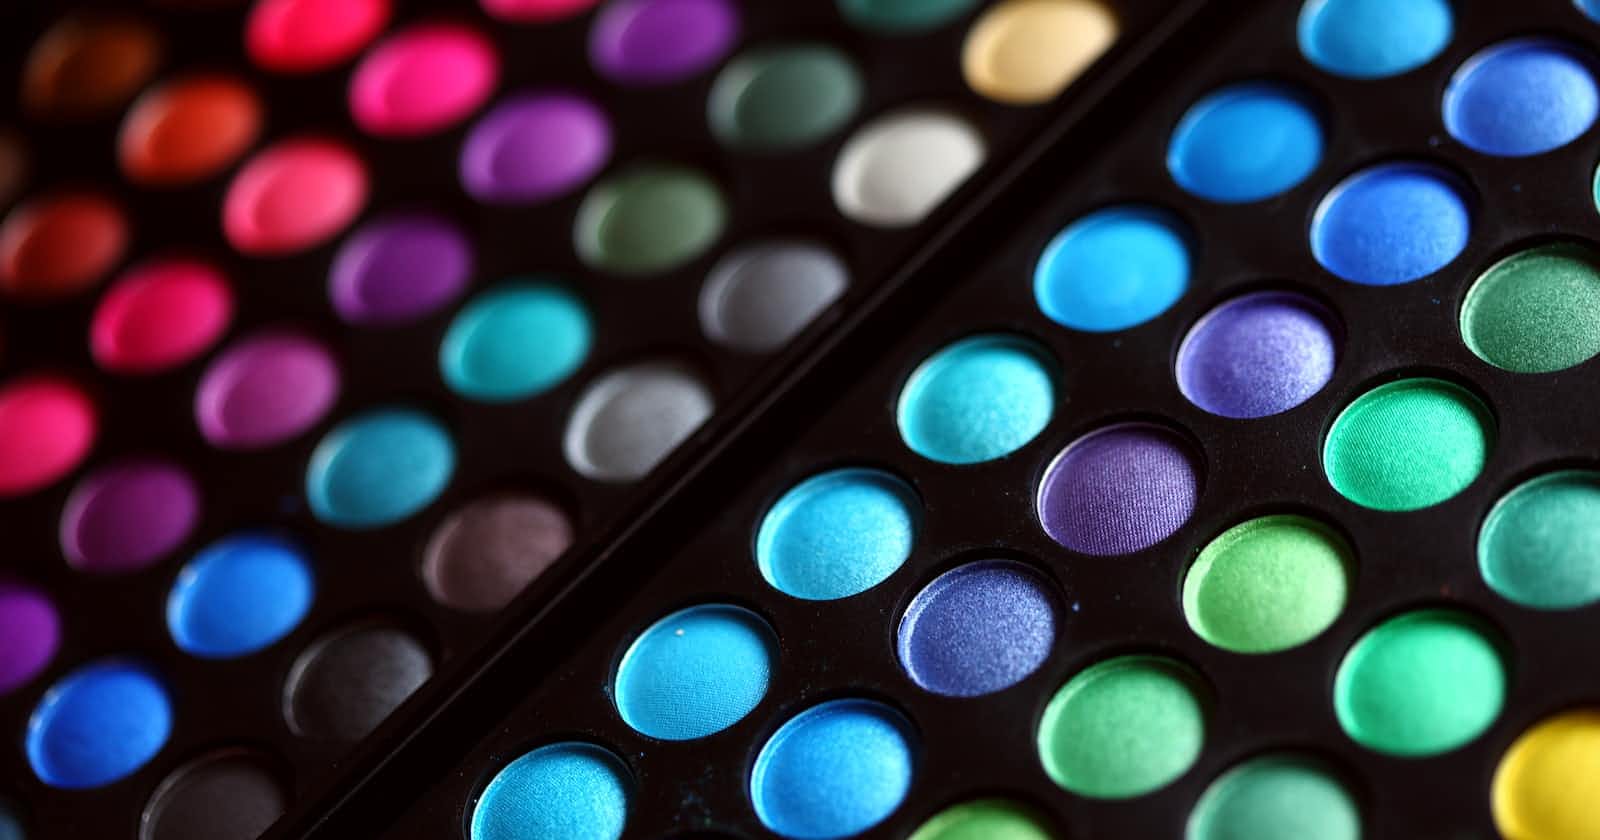 Elevate Your Look with an Trending Eyeshadow Palette